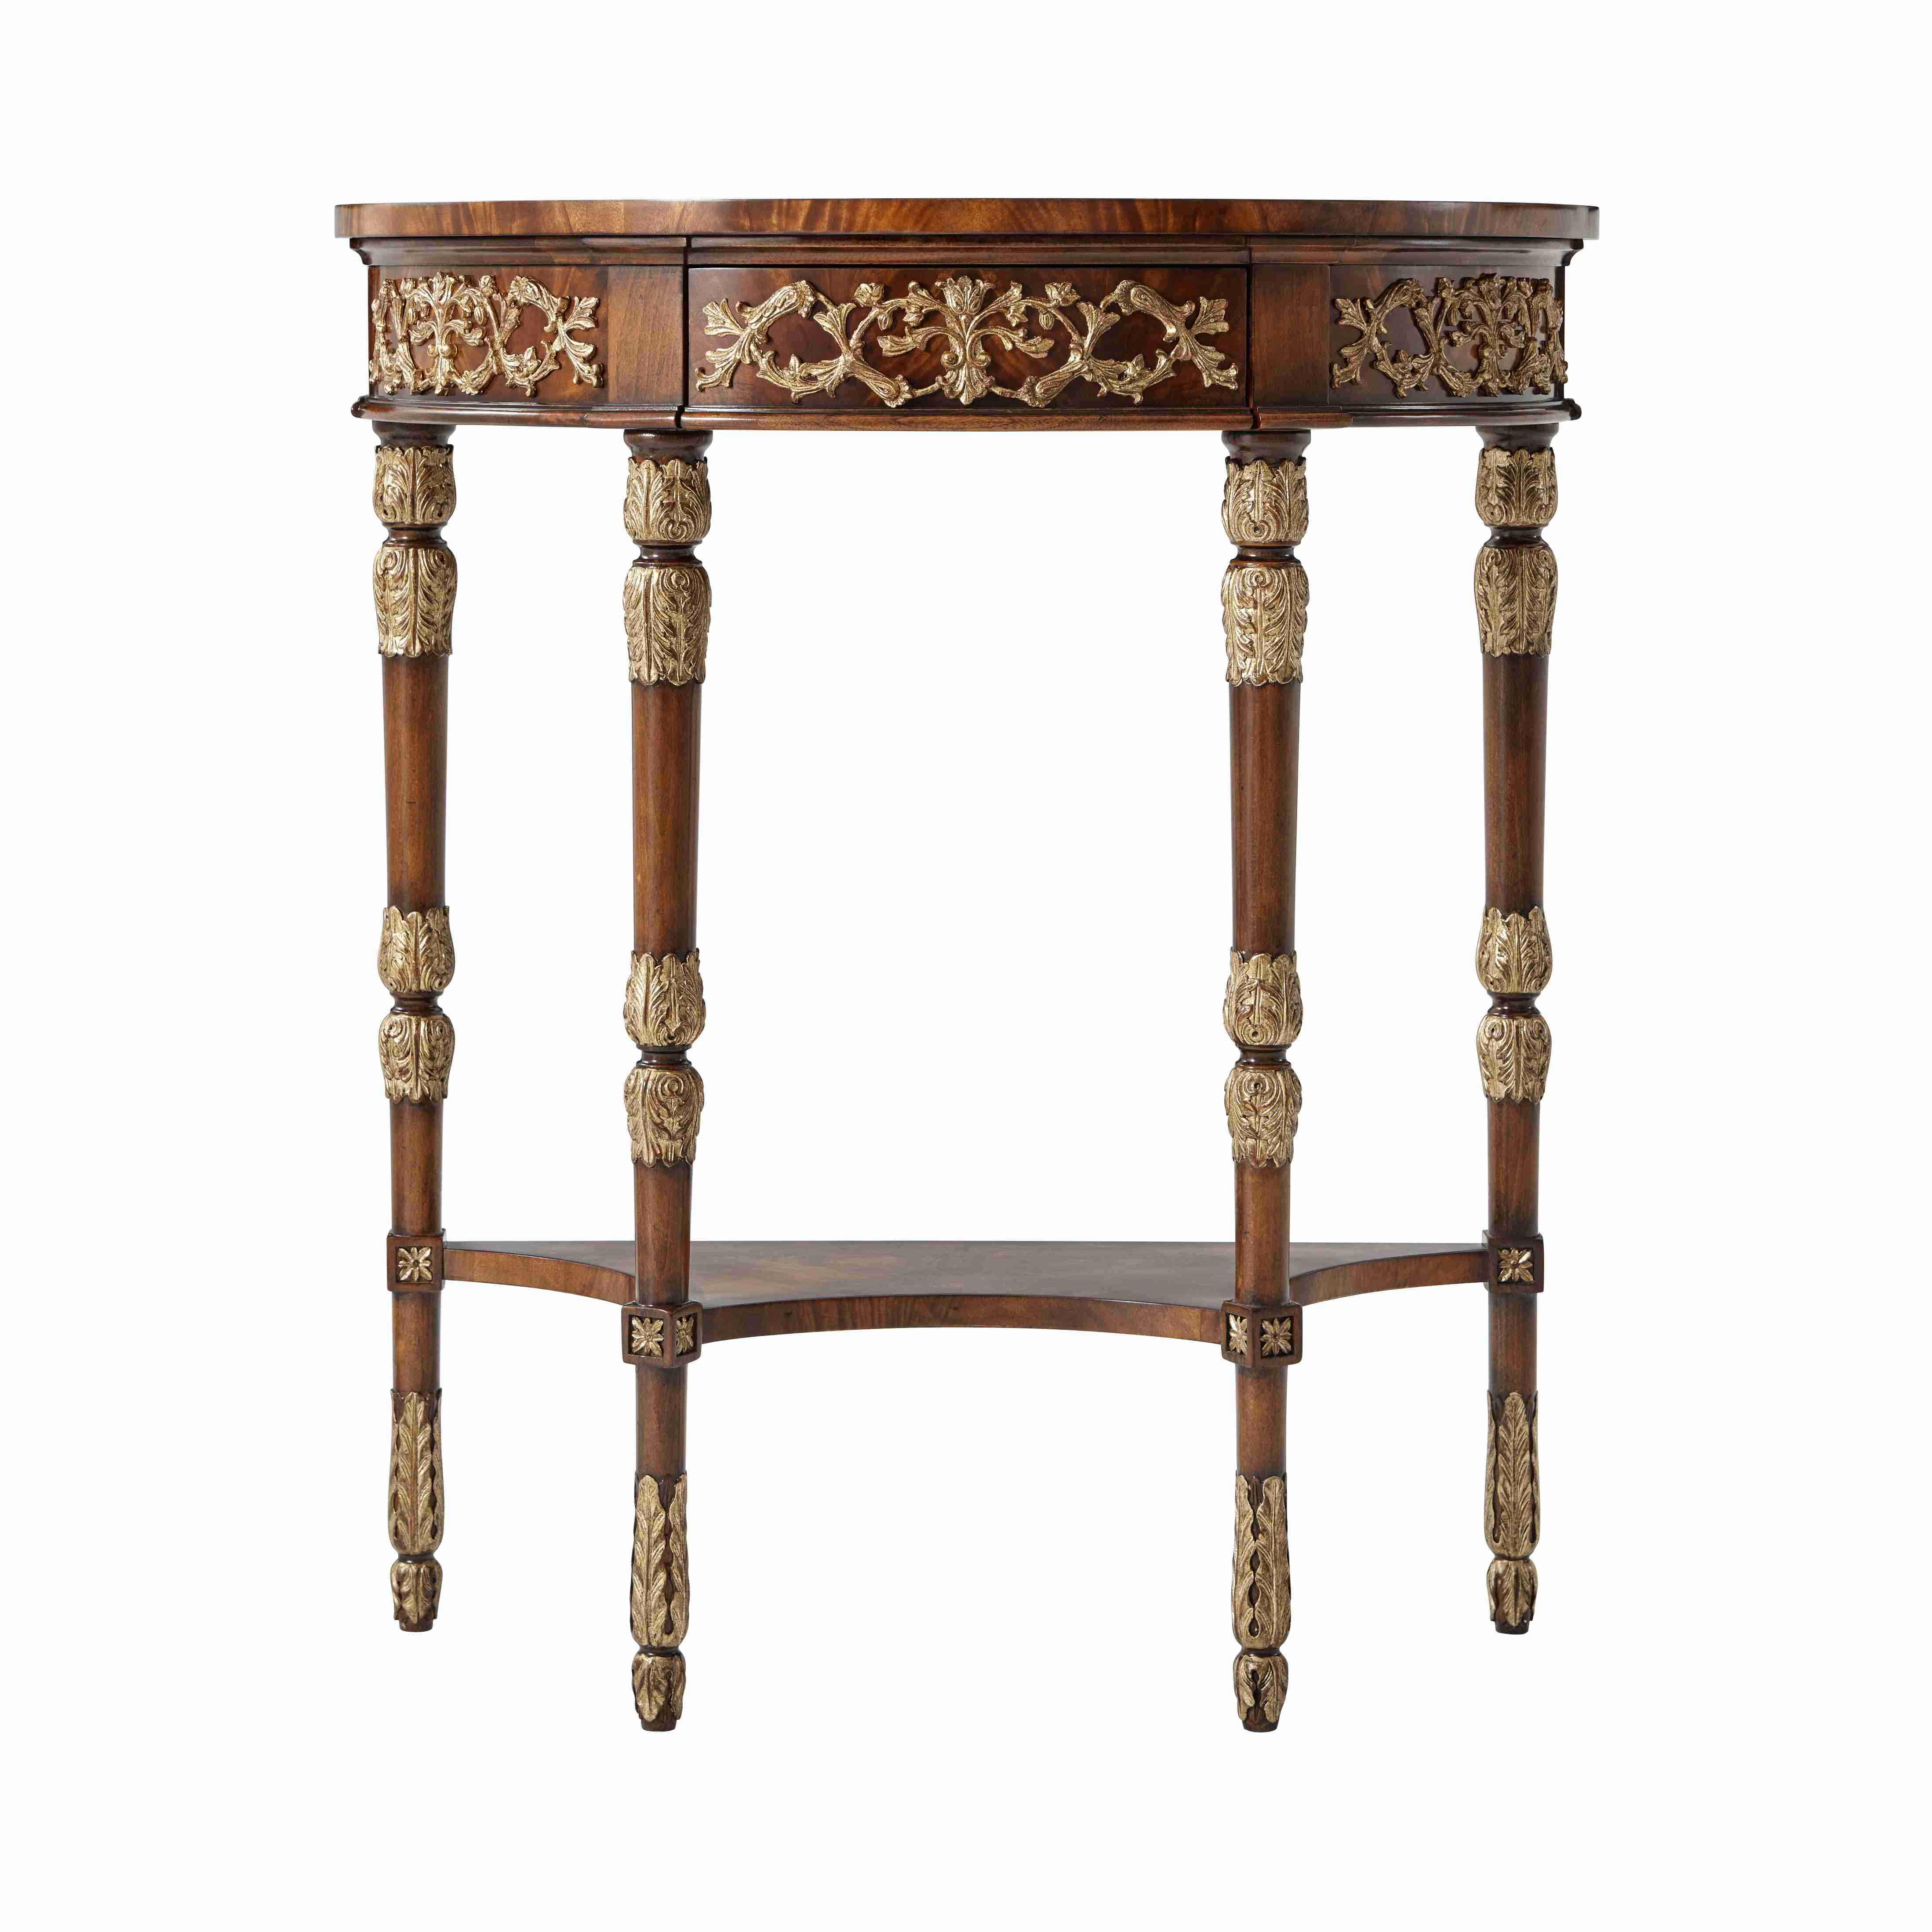 BEAUTY OF LEAVES ACCENT CONSOLE TABLE